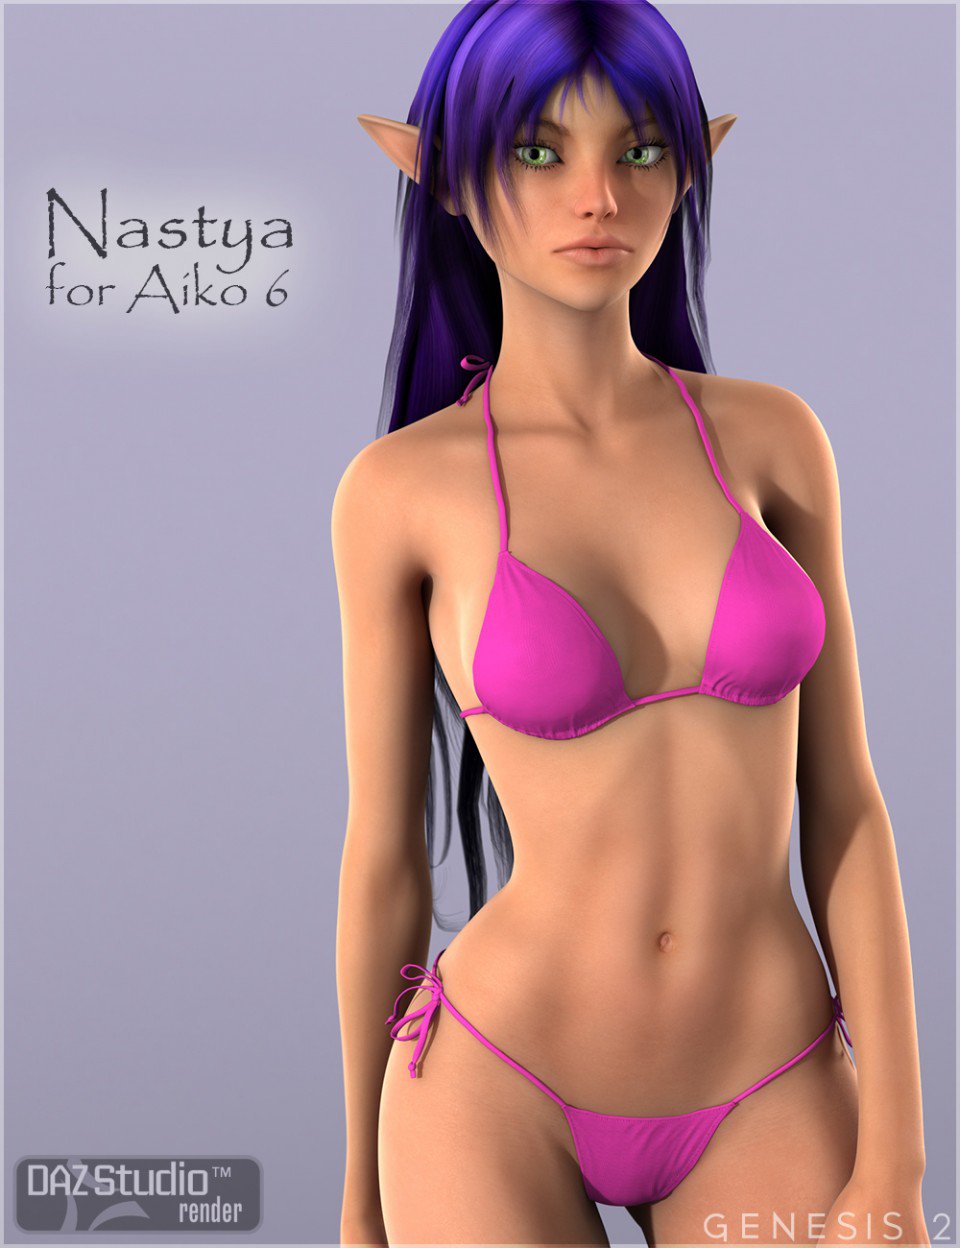 Nastya for Aiko 6 | 3D Models and 3D Software by DAZ 3D